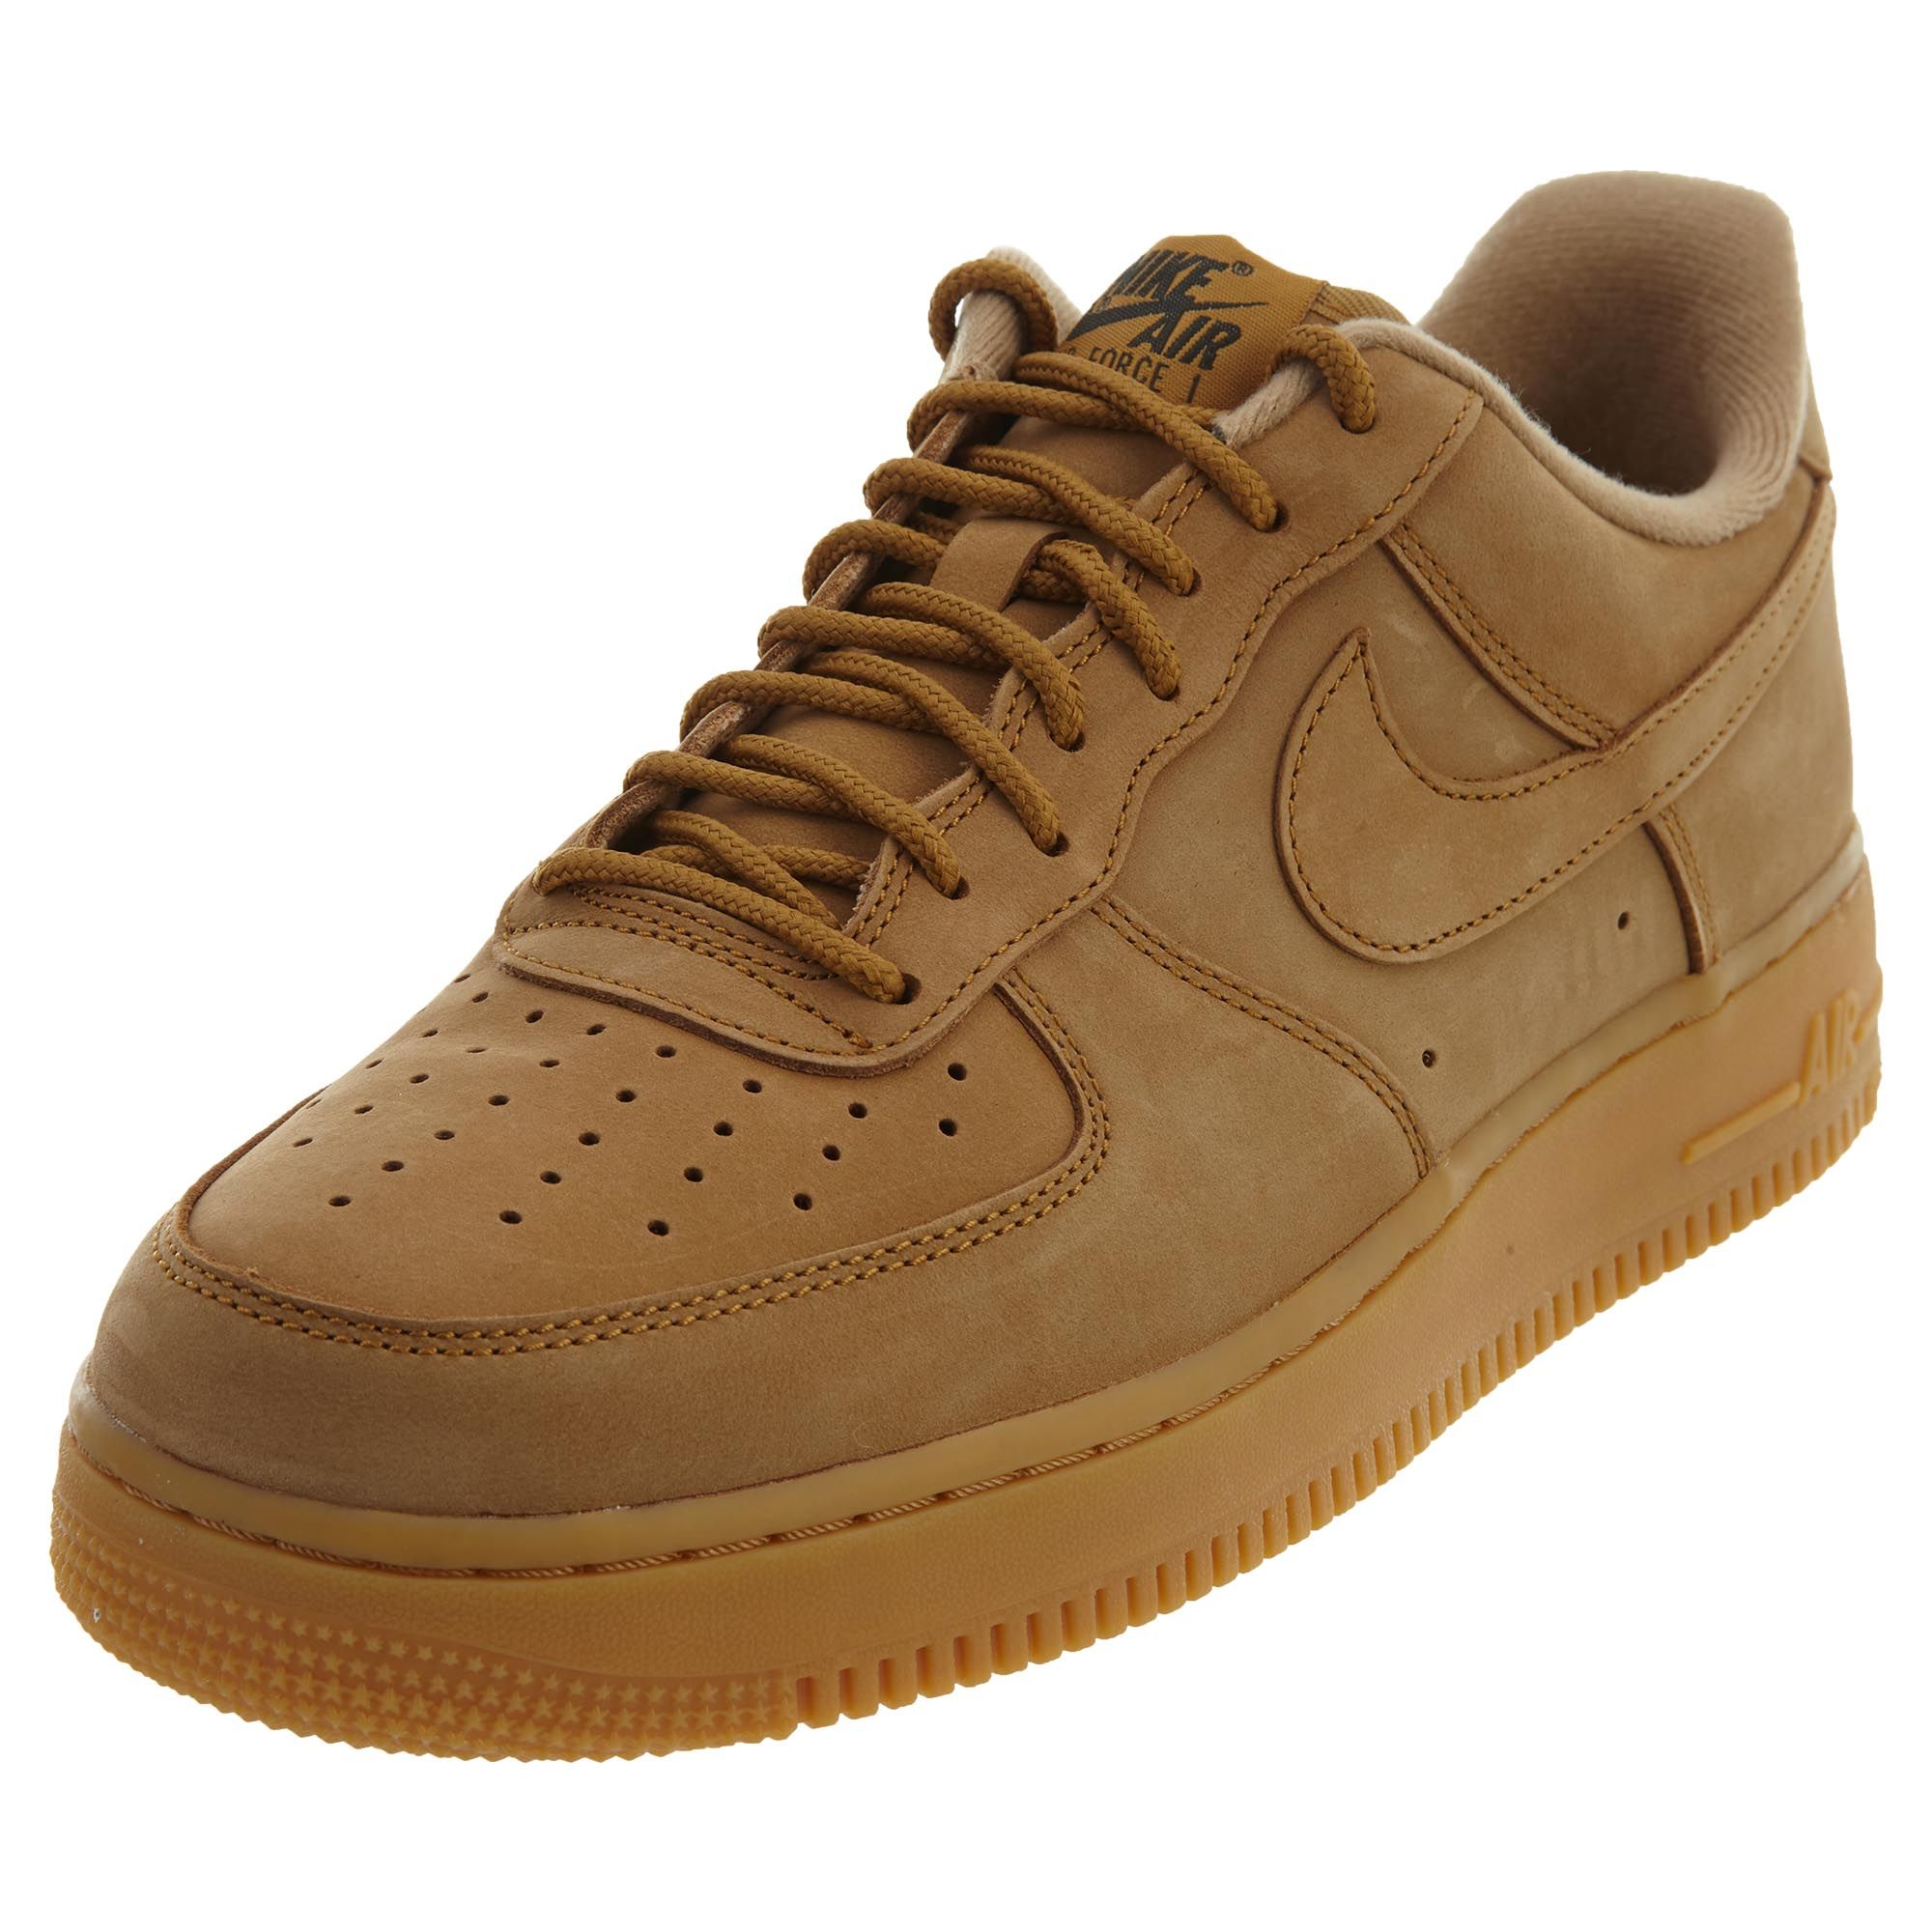 Nike Air Force 1 '07 Wb Mens Style 